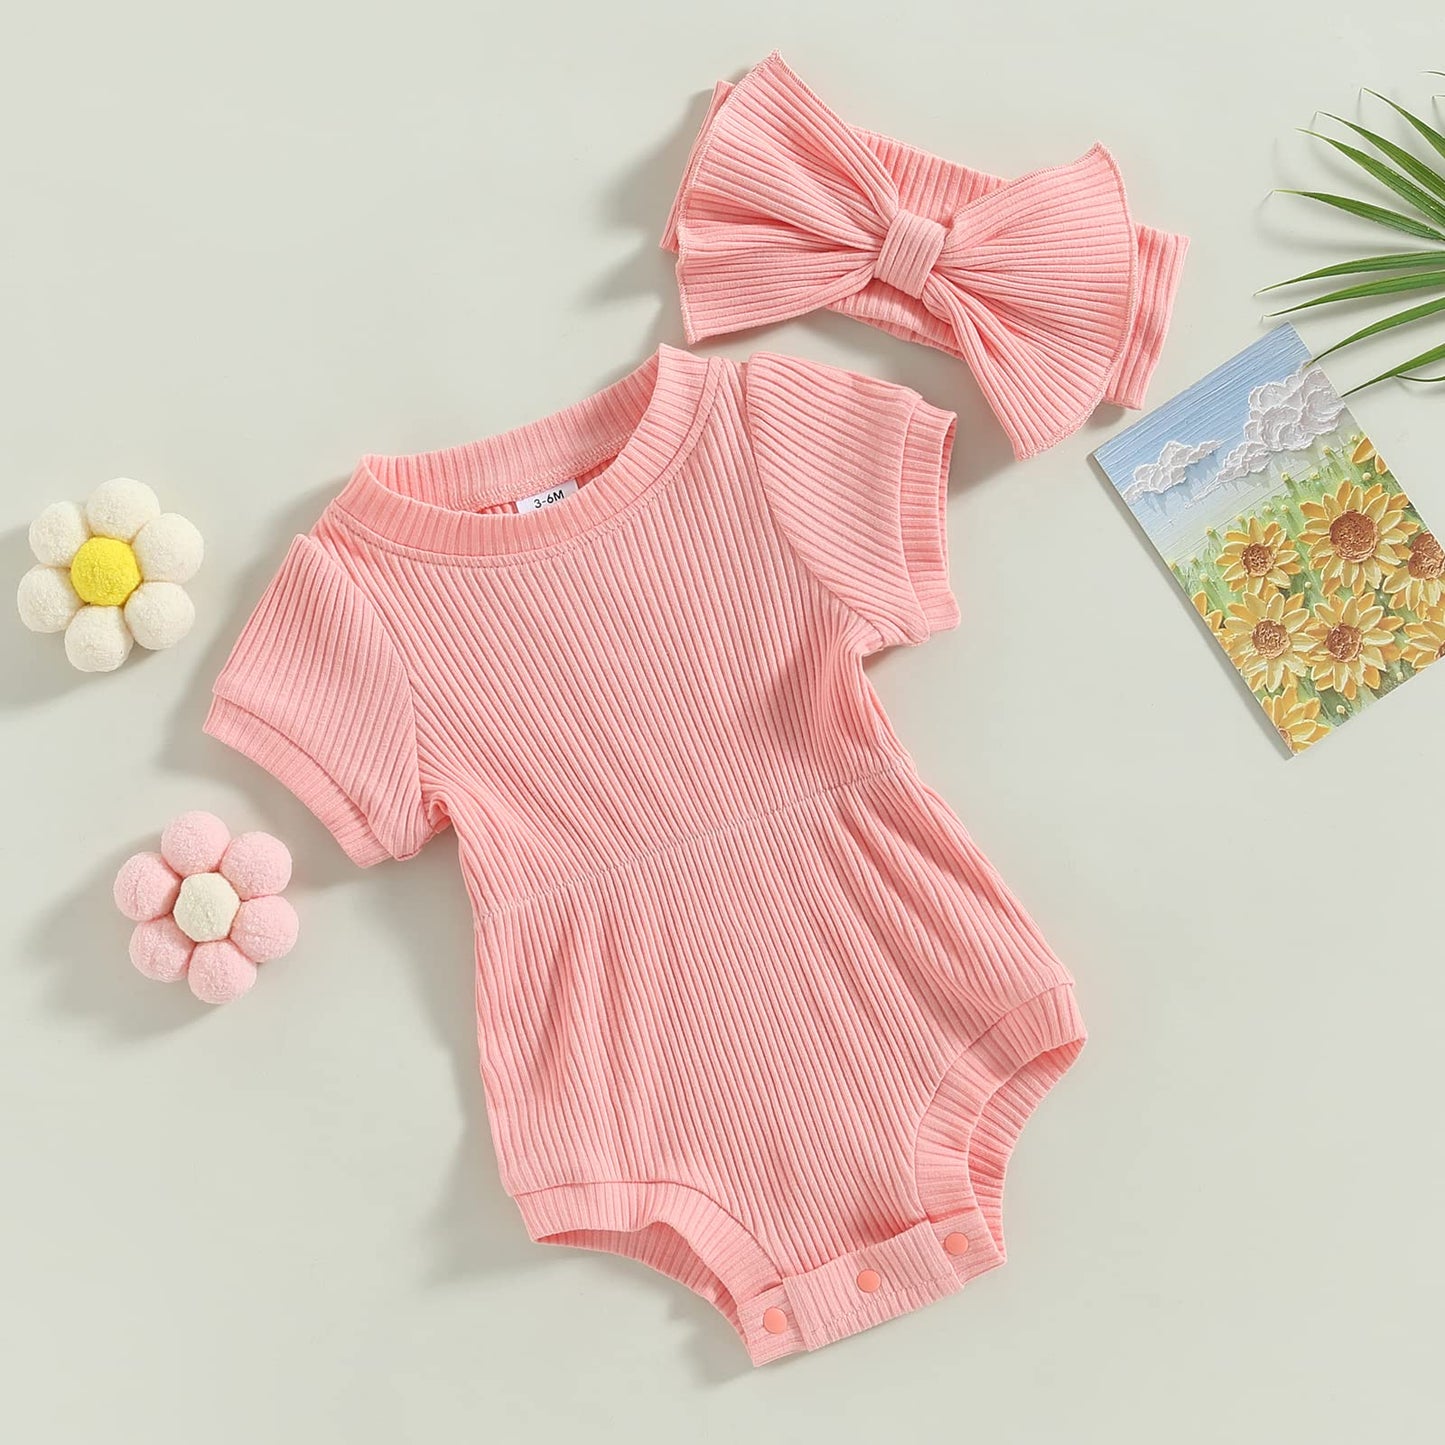 KtwHarnu Newborn Baby Girl Clothes Solid Ribbed Short Sleeve Romper Jumpsuit Bodysuit with Headband Summer Outfit(3-6 M)